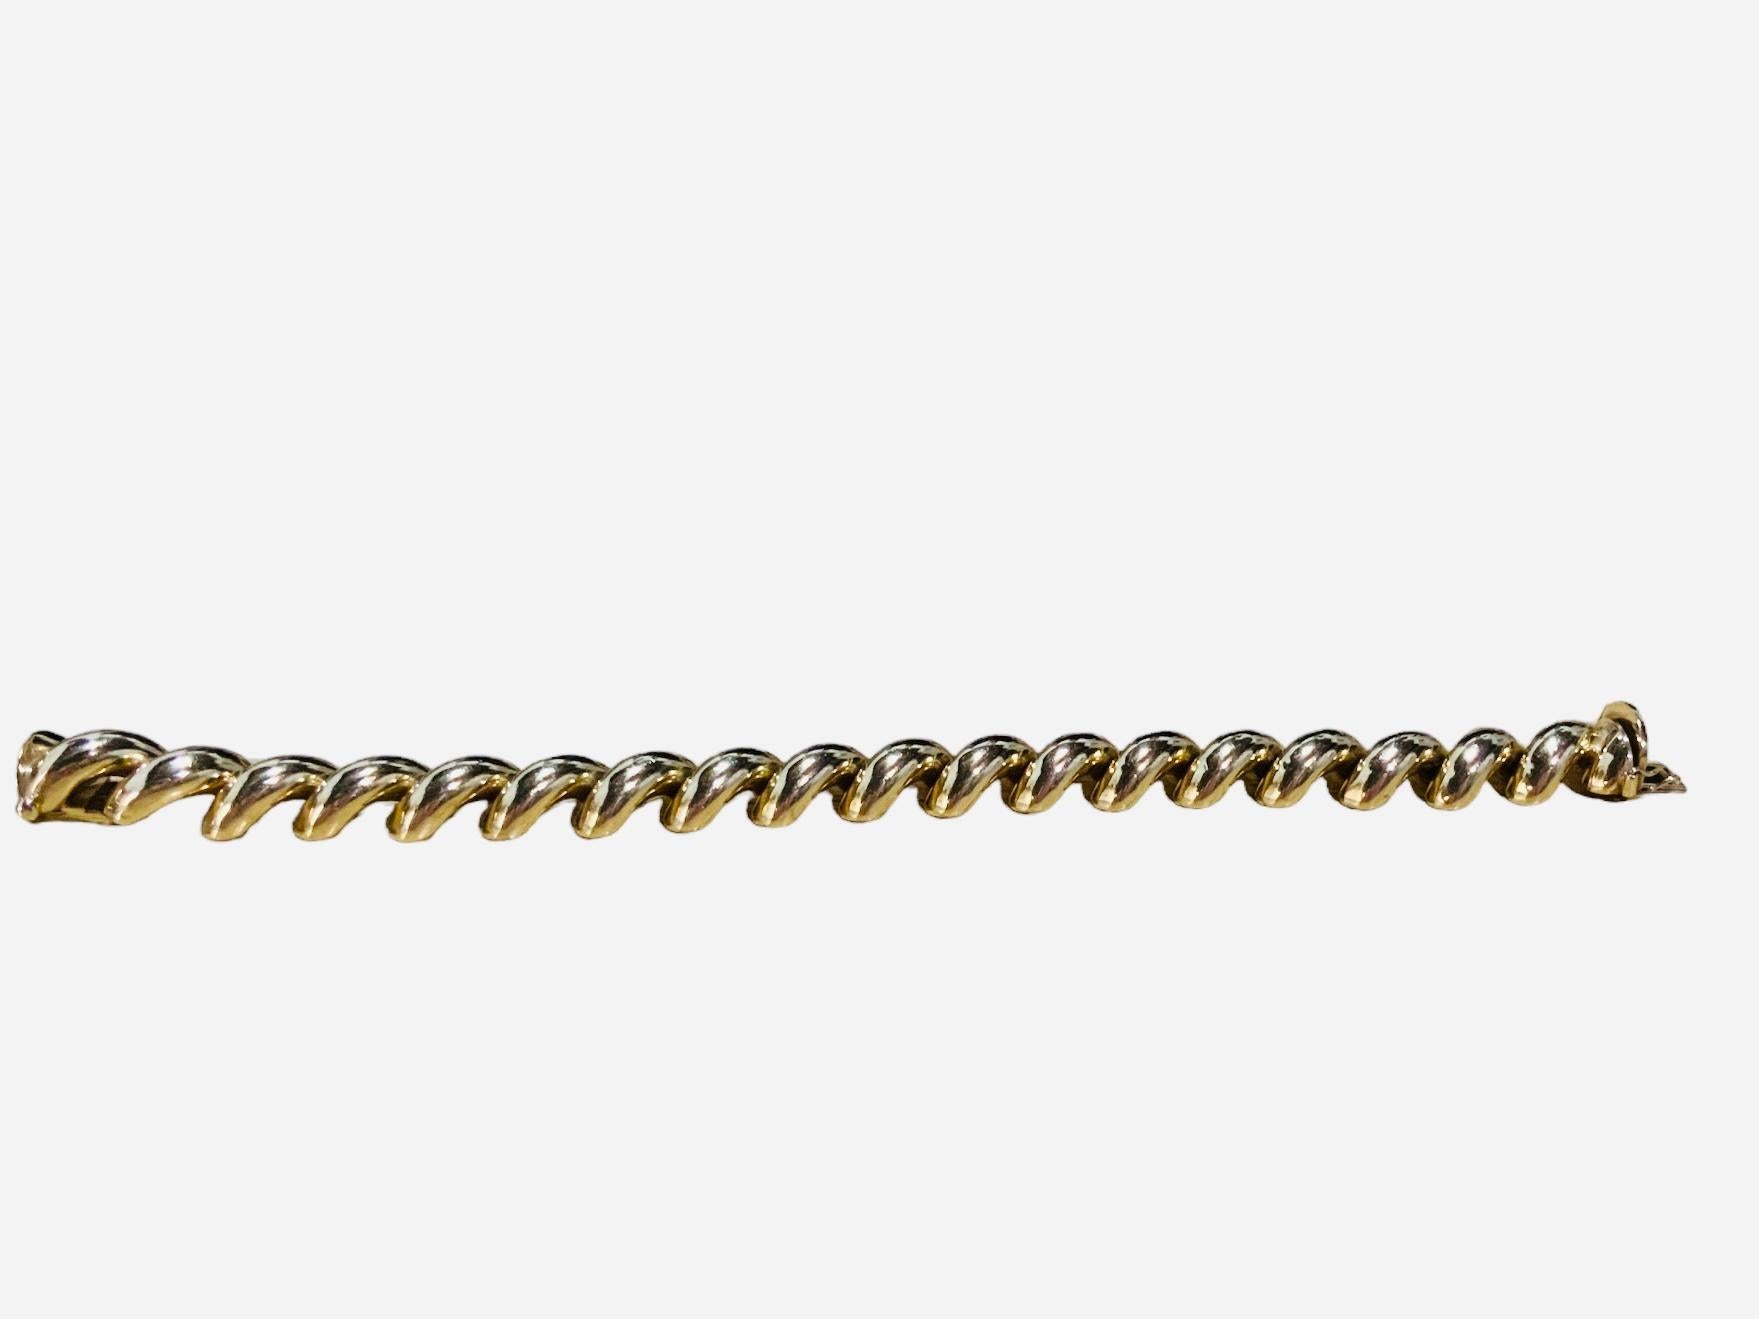 This is an Italian 14K yellow gold bracelet . It is a San Marco/Macaroni link bracelet of 7.75 inches long . Its weight is 28.0 grams. It has a hidden box clasp that contains an eight safeguard. The bracelet is hallmarked 14K Italy.